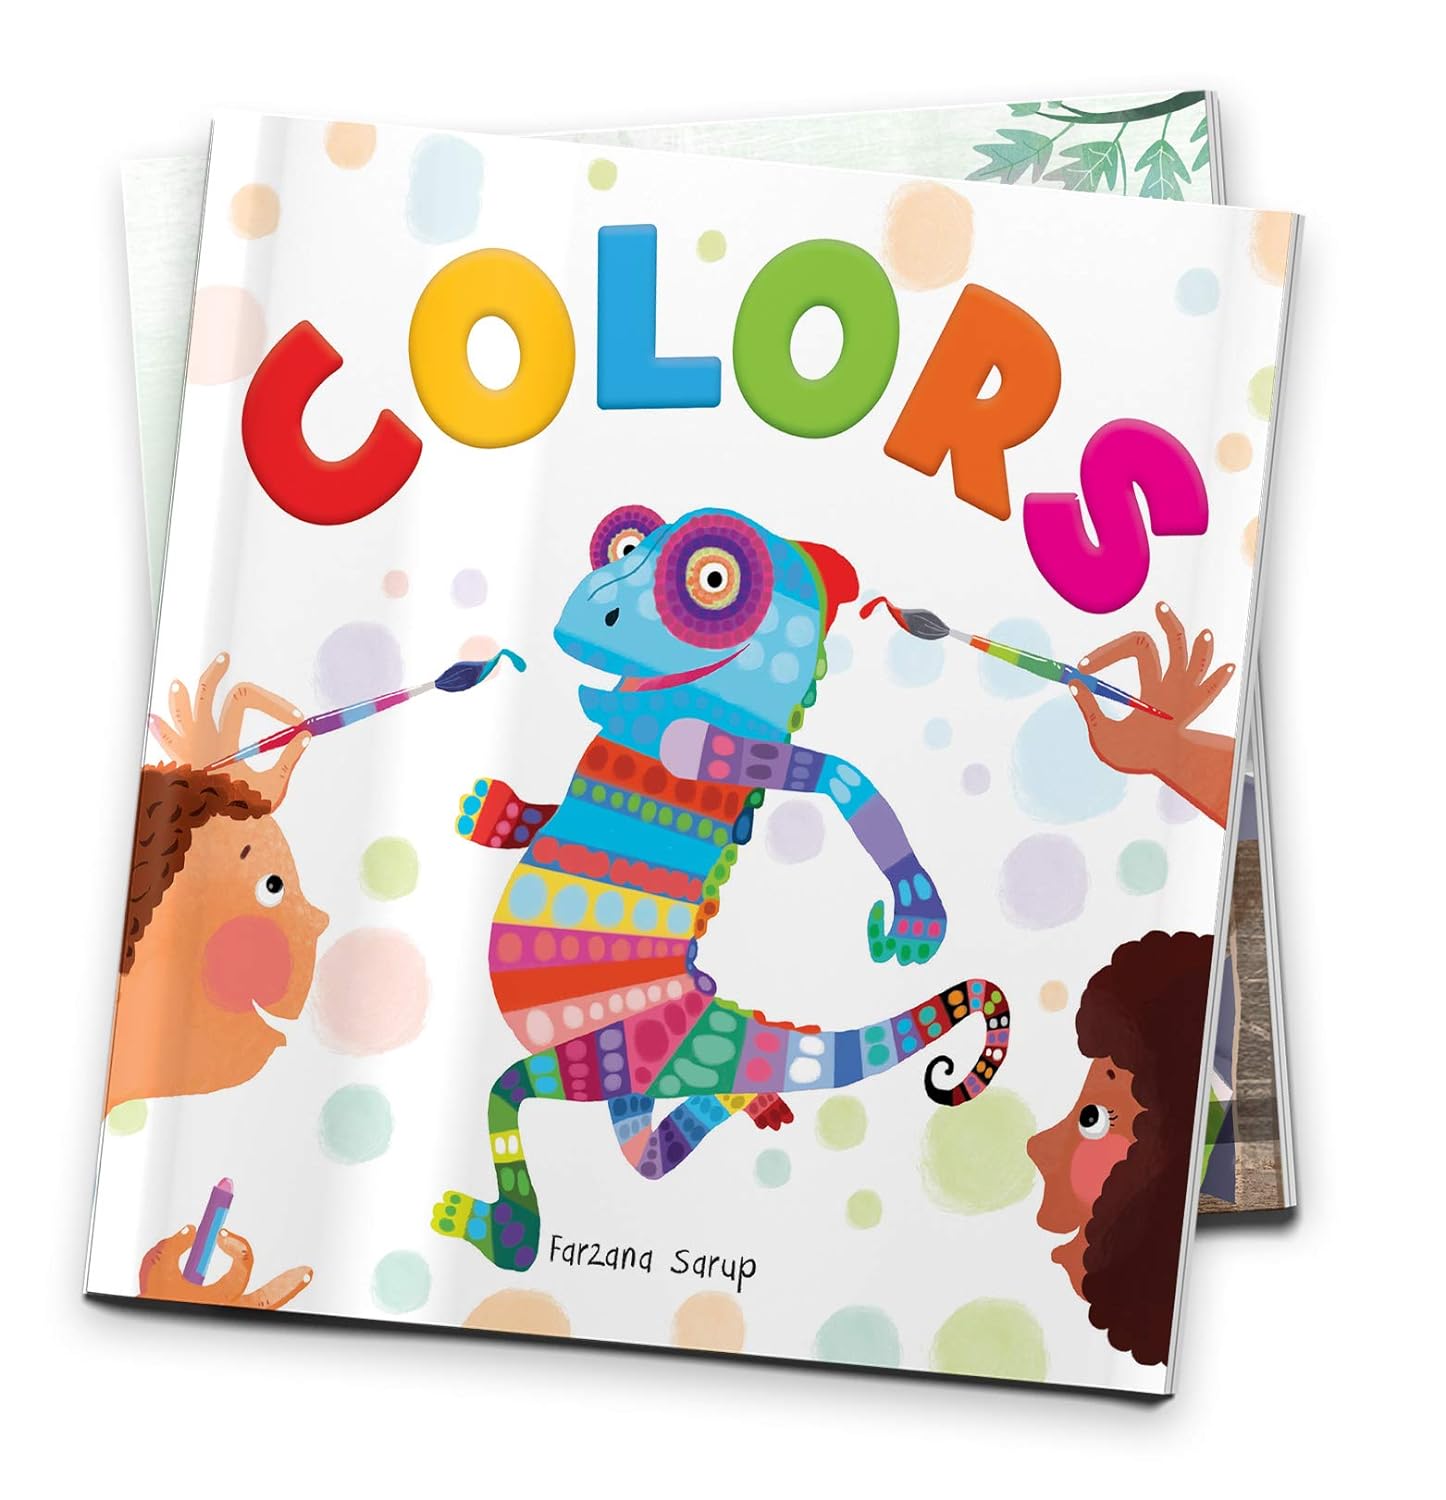 Colors: Illustrated Book On Colors